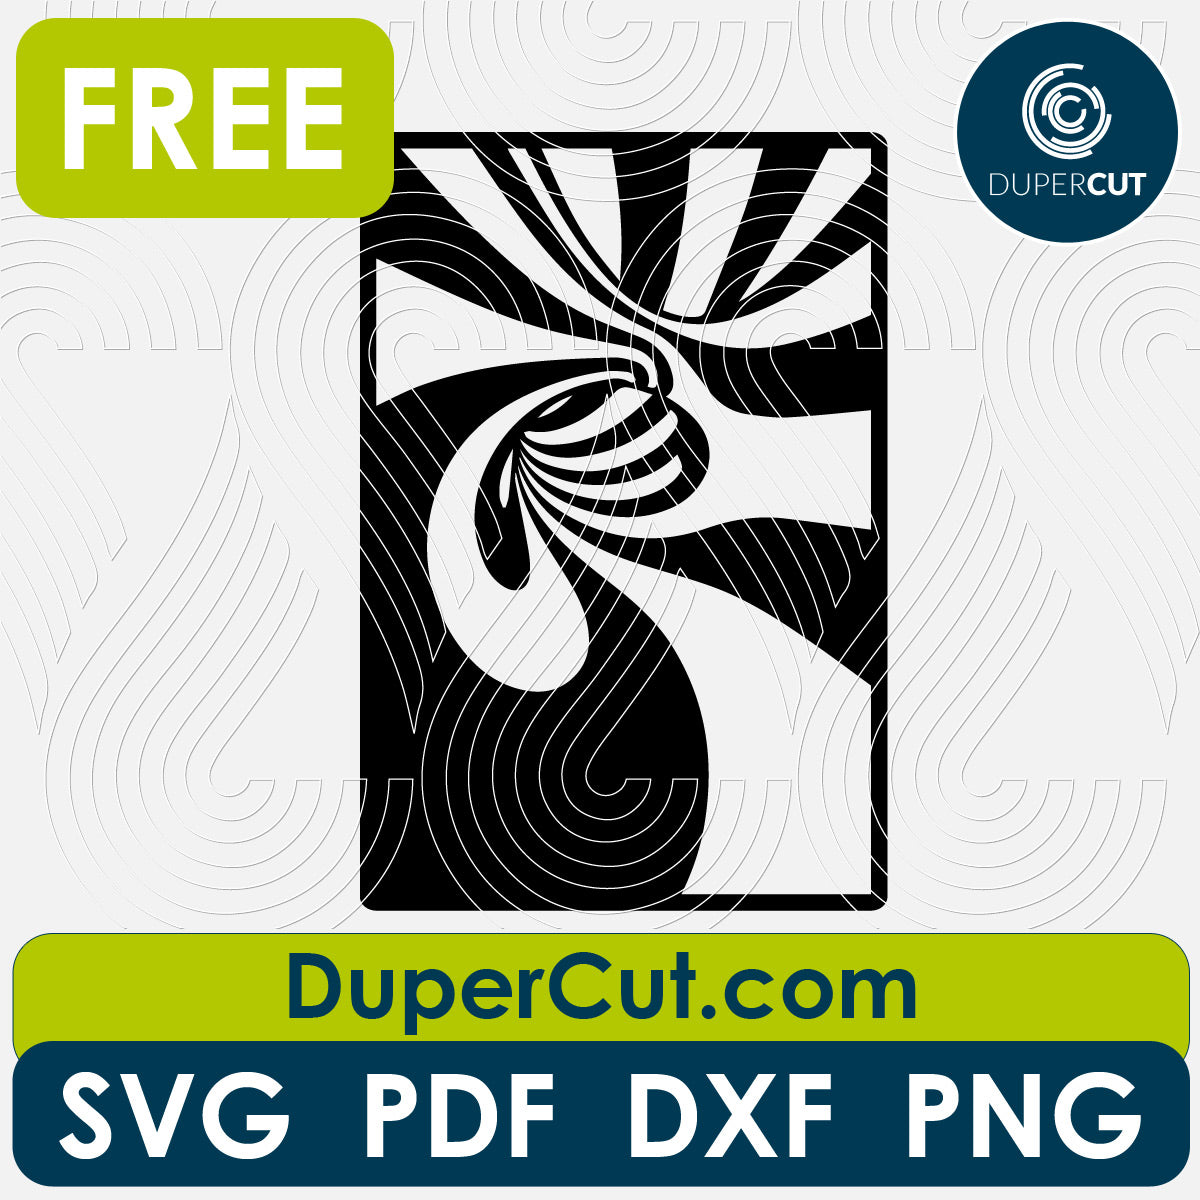 Optical illusion abstract black and white pattern - free SVG PNG DXF vector files for laser and blade cutting machines. Glowforge, Cricut, Silhouette cameo templates by DuperCut.com